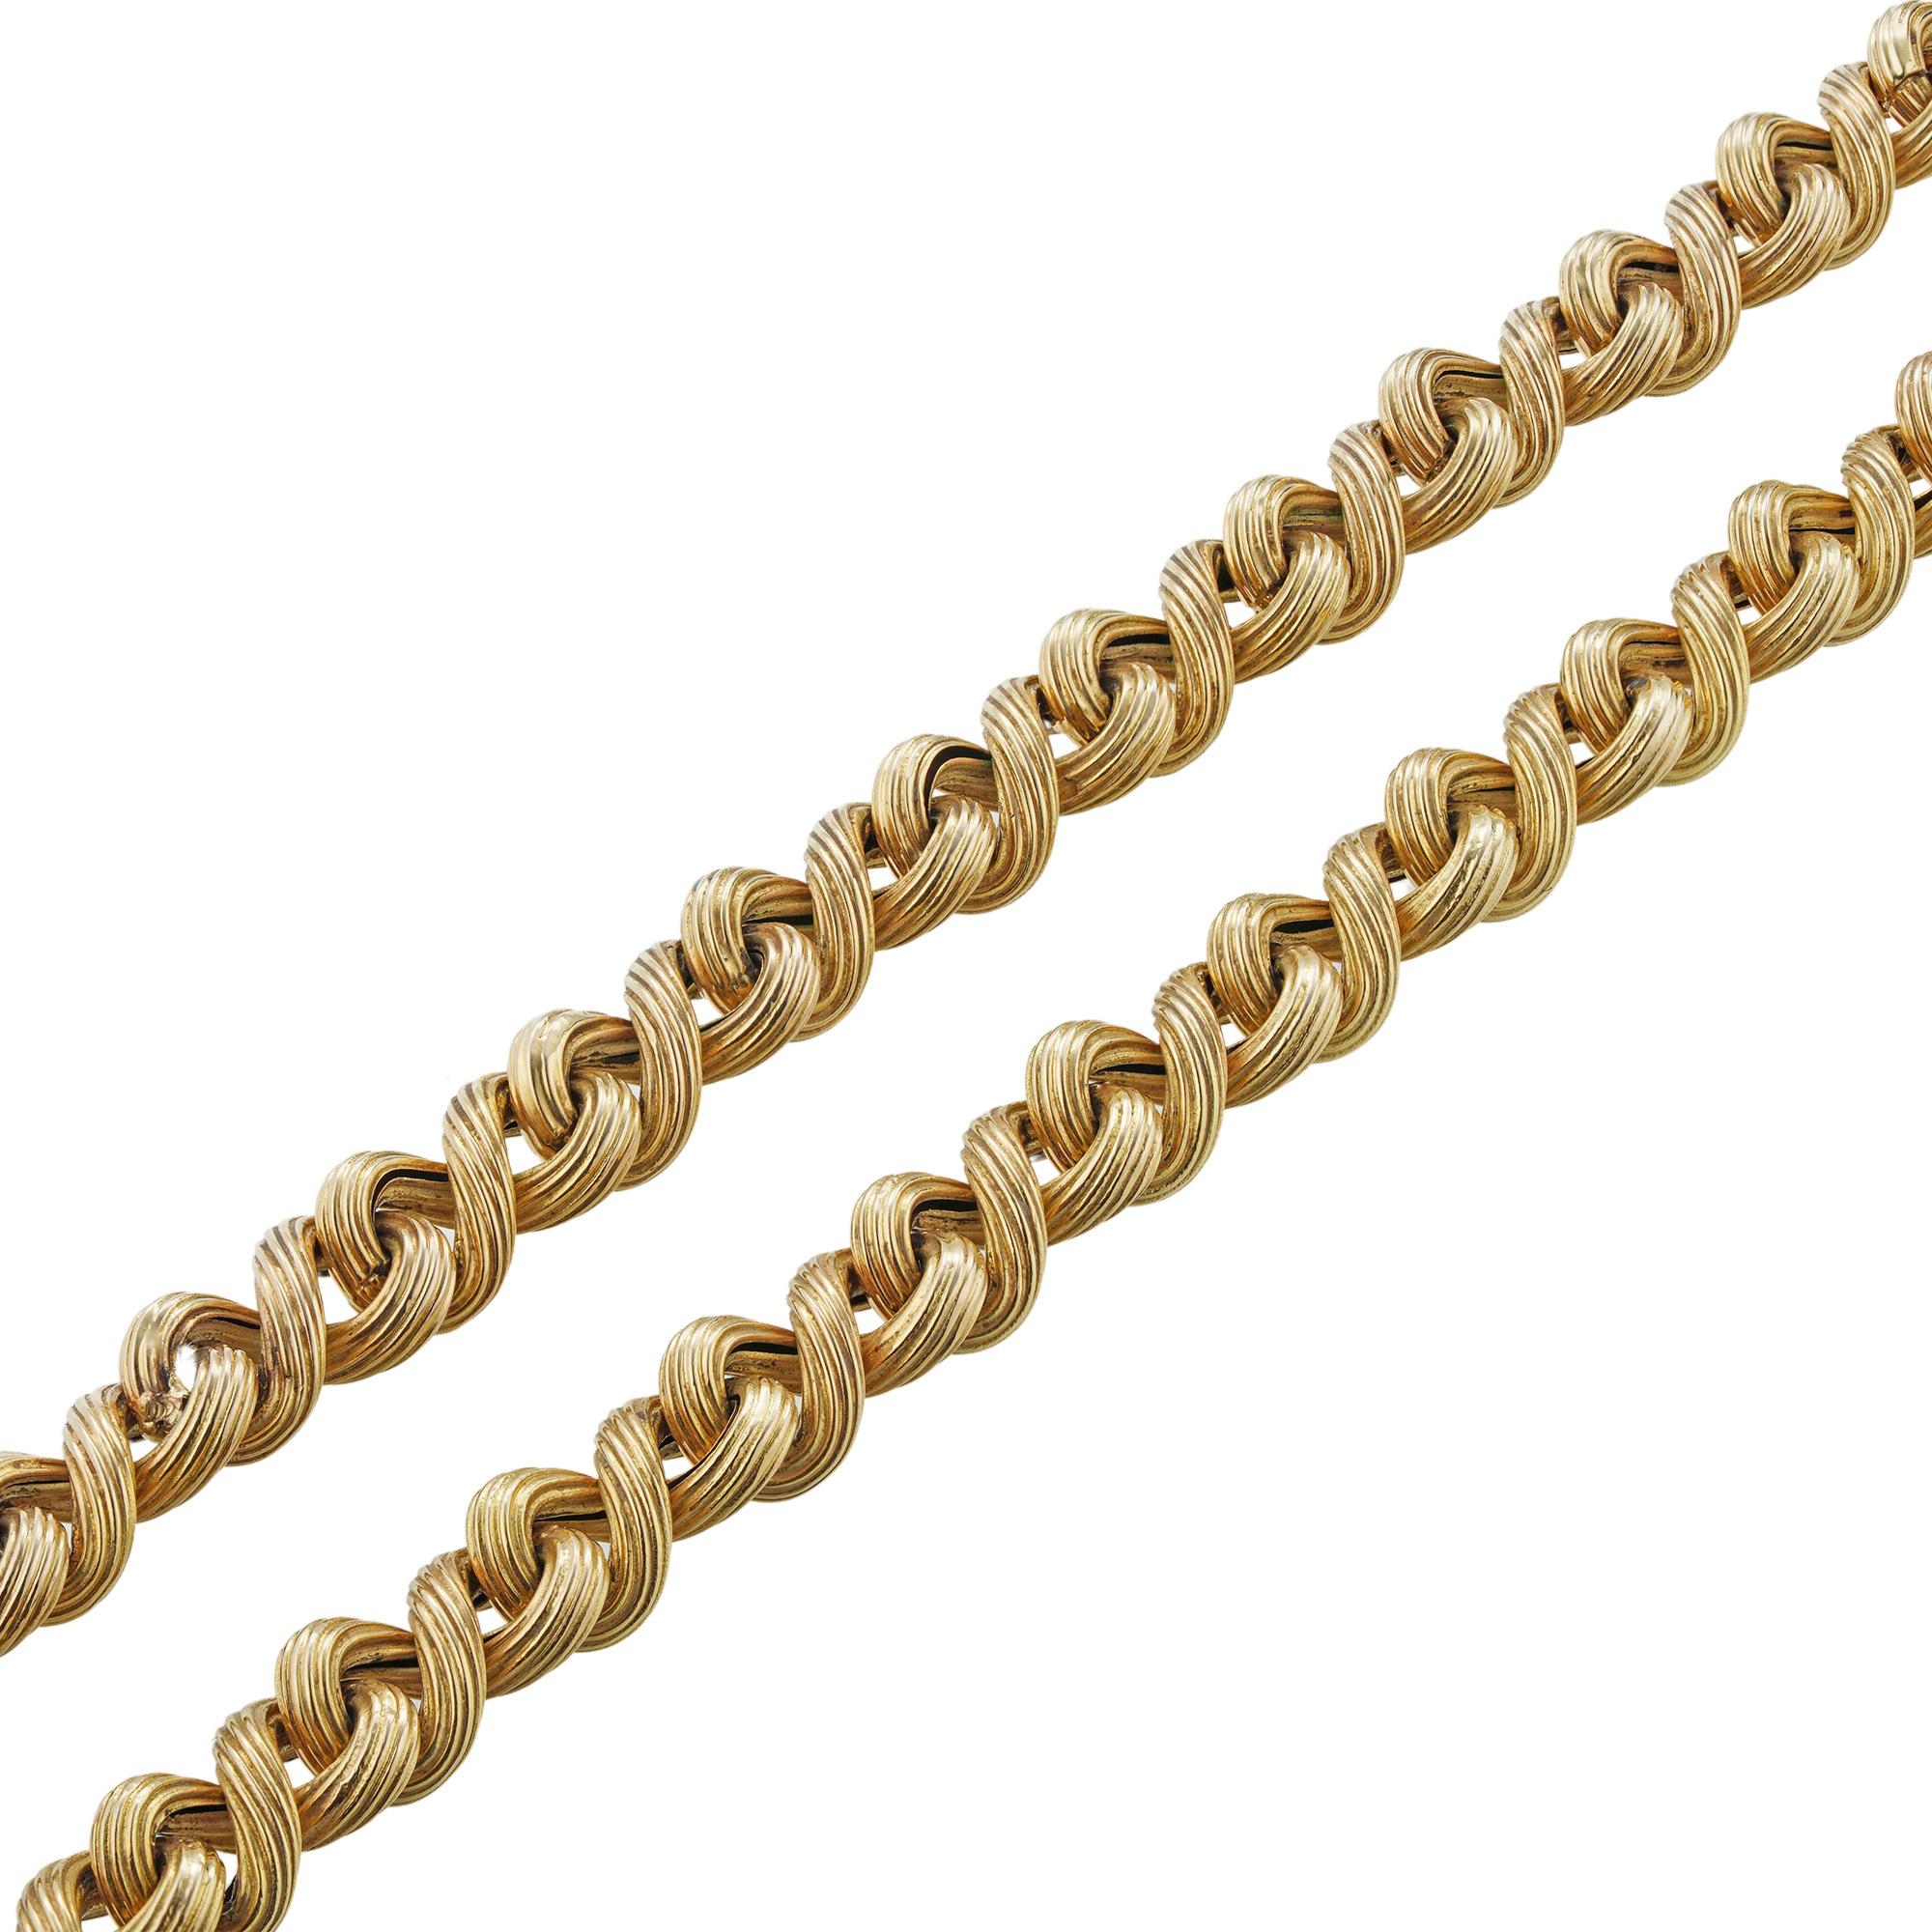 A 19th Century 18ct gold link chain, with textured figure of eight links, all in yellow gold, circa 1880, length 114cm, width 0.6cm, gross weight 44.14 grams.

This chain is in very good condition. Unmarked tested as 18ct Gold. 

A sophisticated